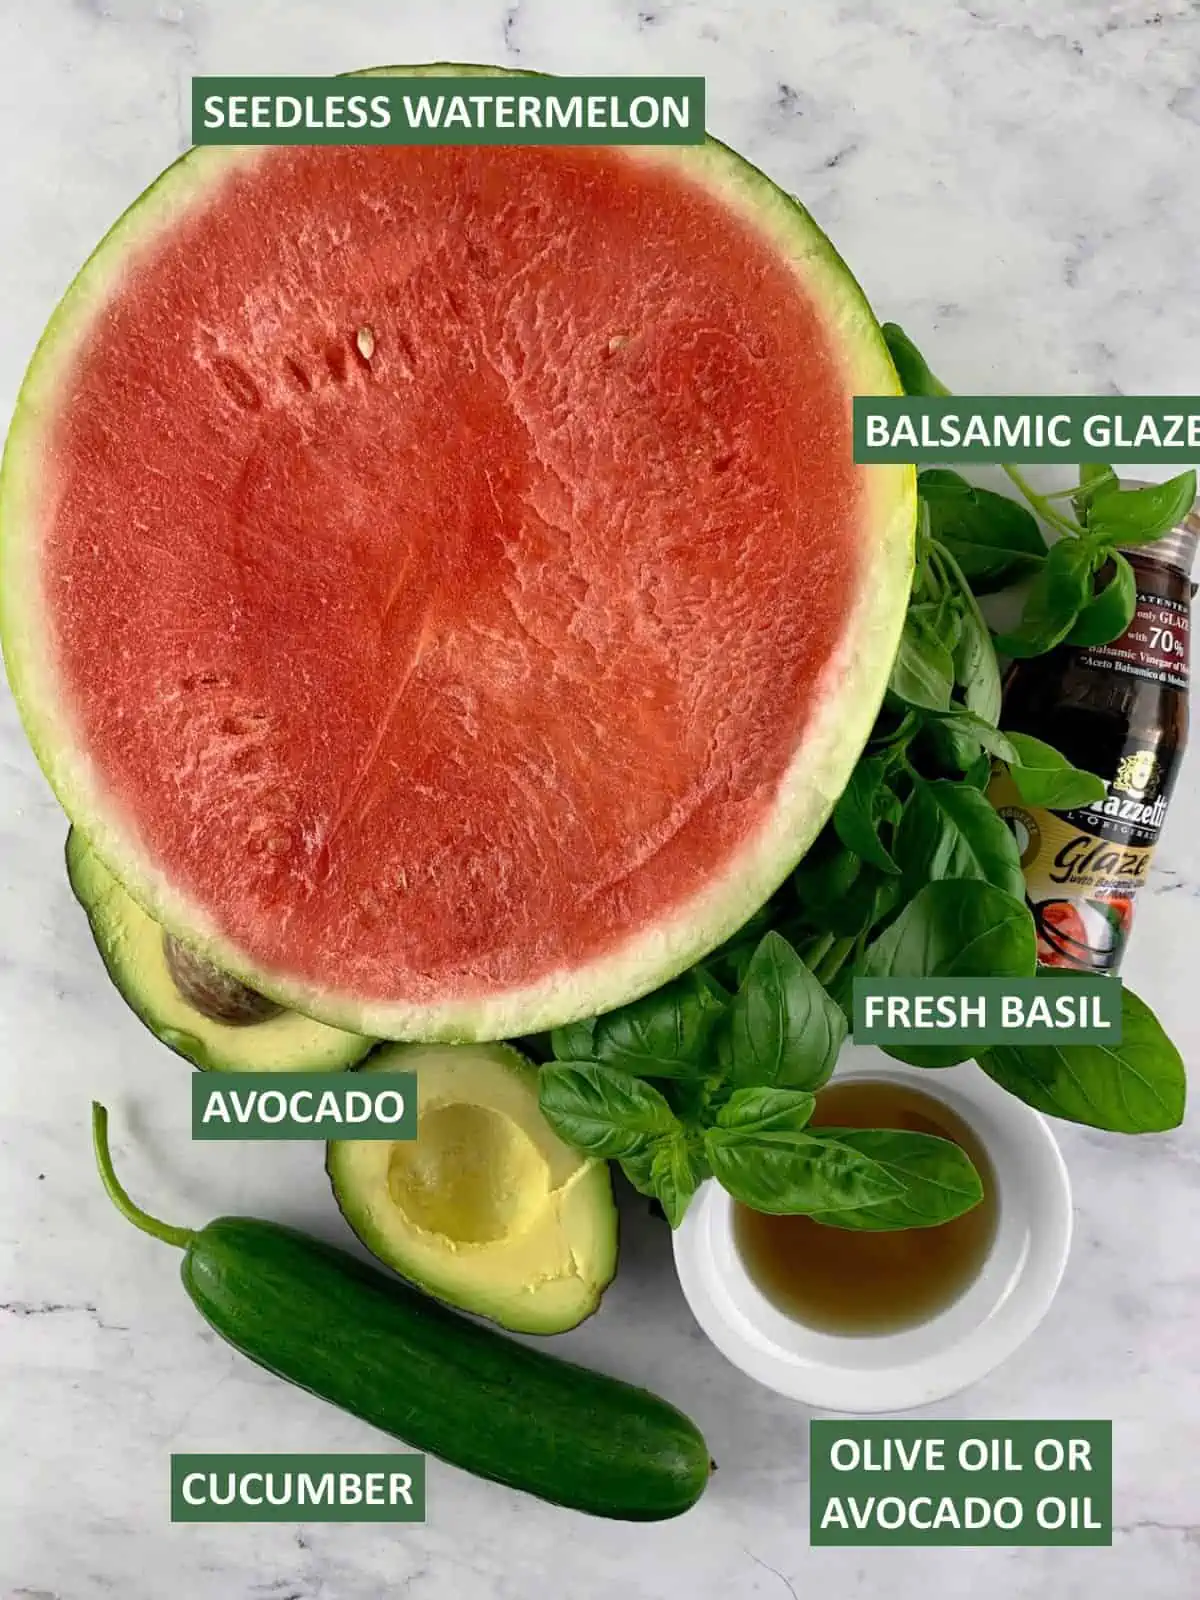 LABELLED INGREDIENTS NEEDED TO MAKE WATERMELON AVOCADO SALAD